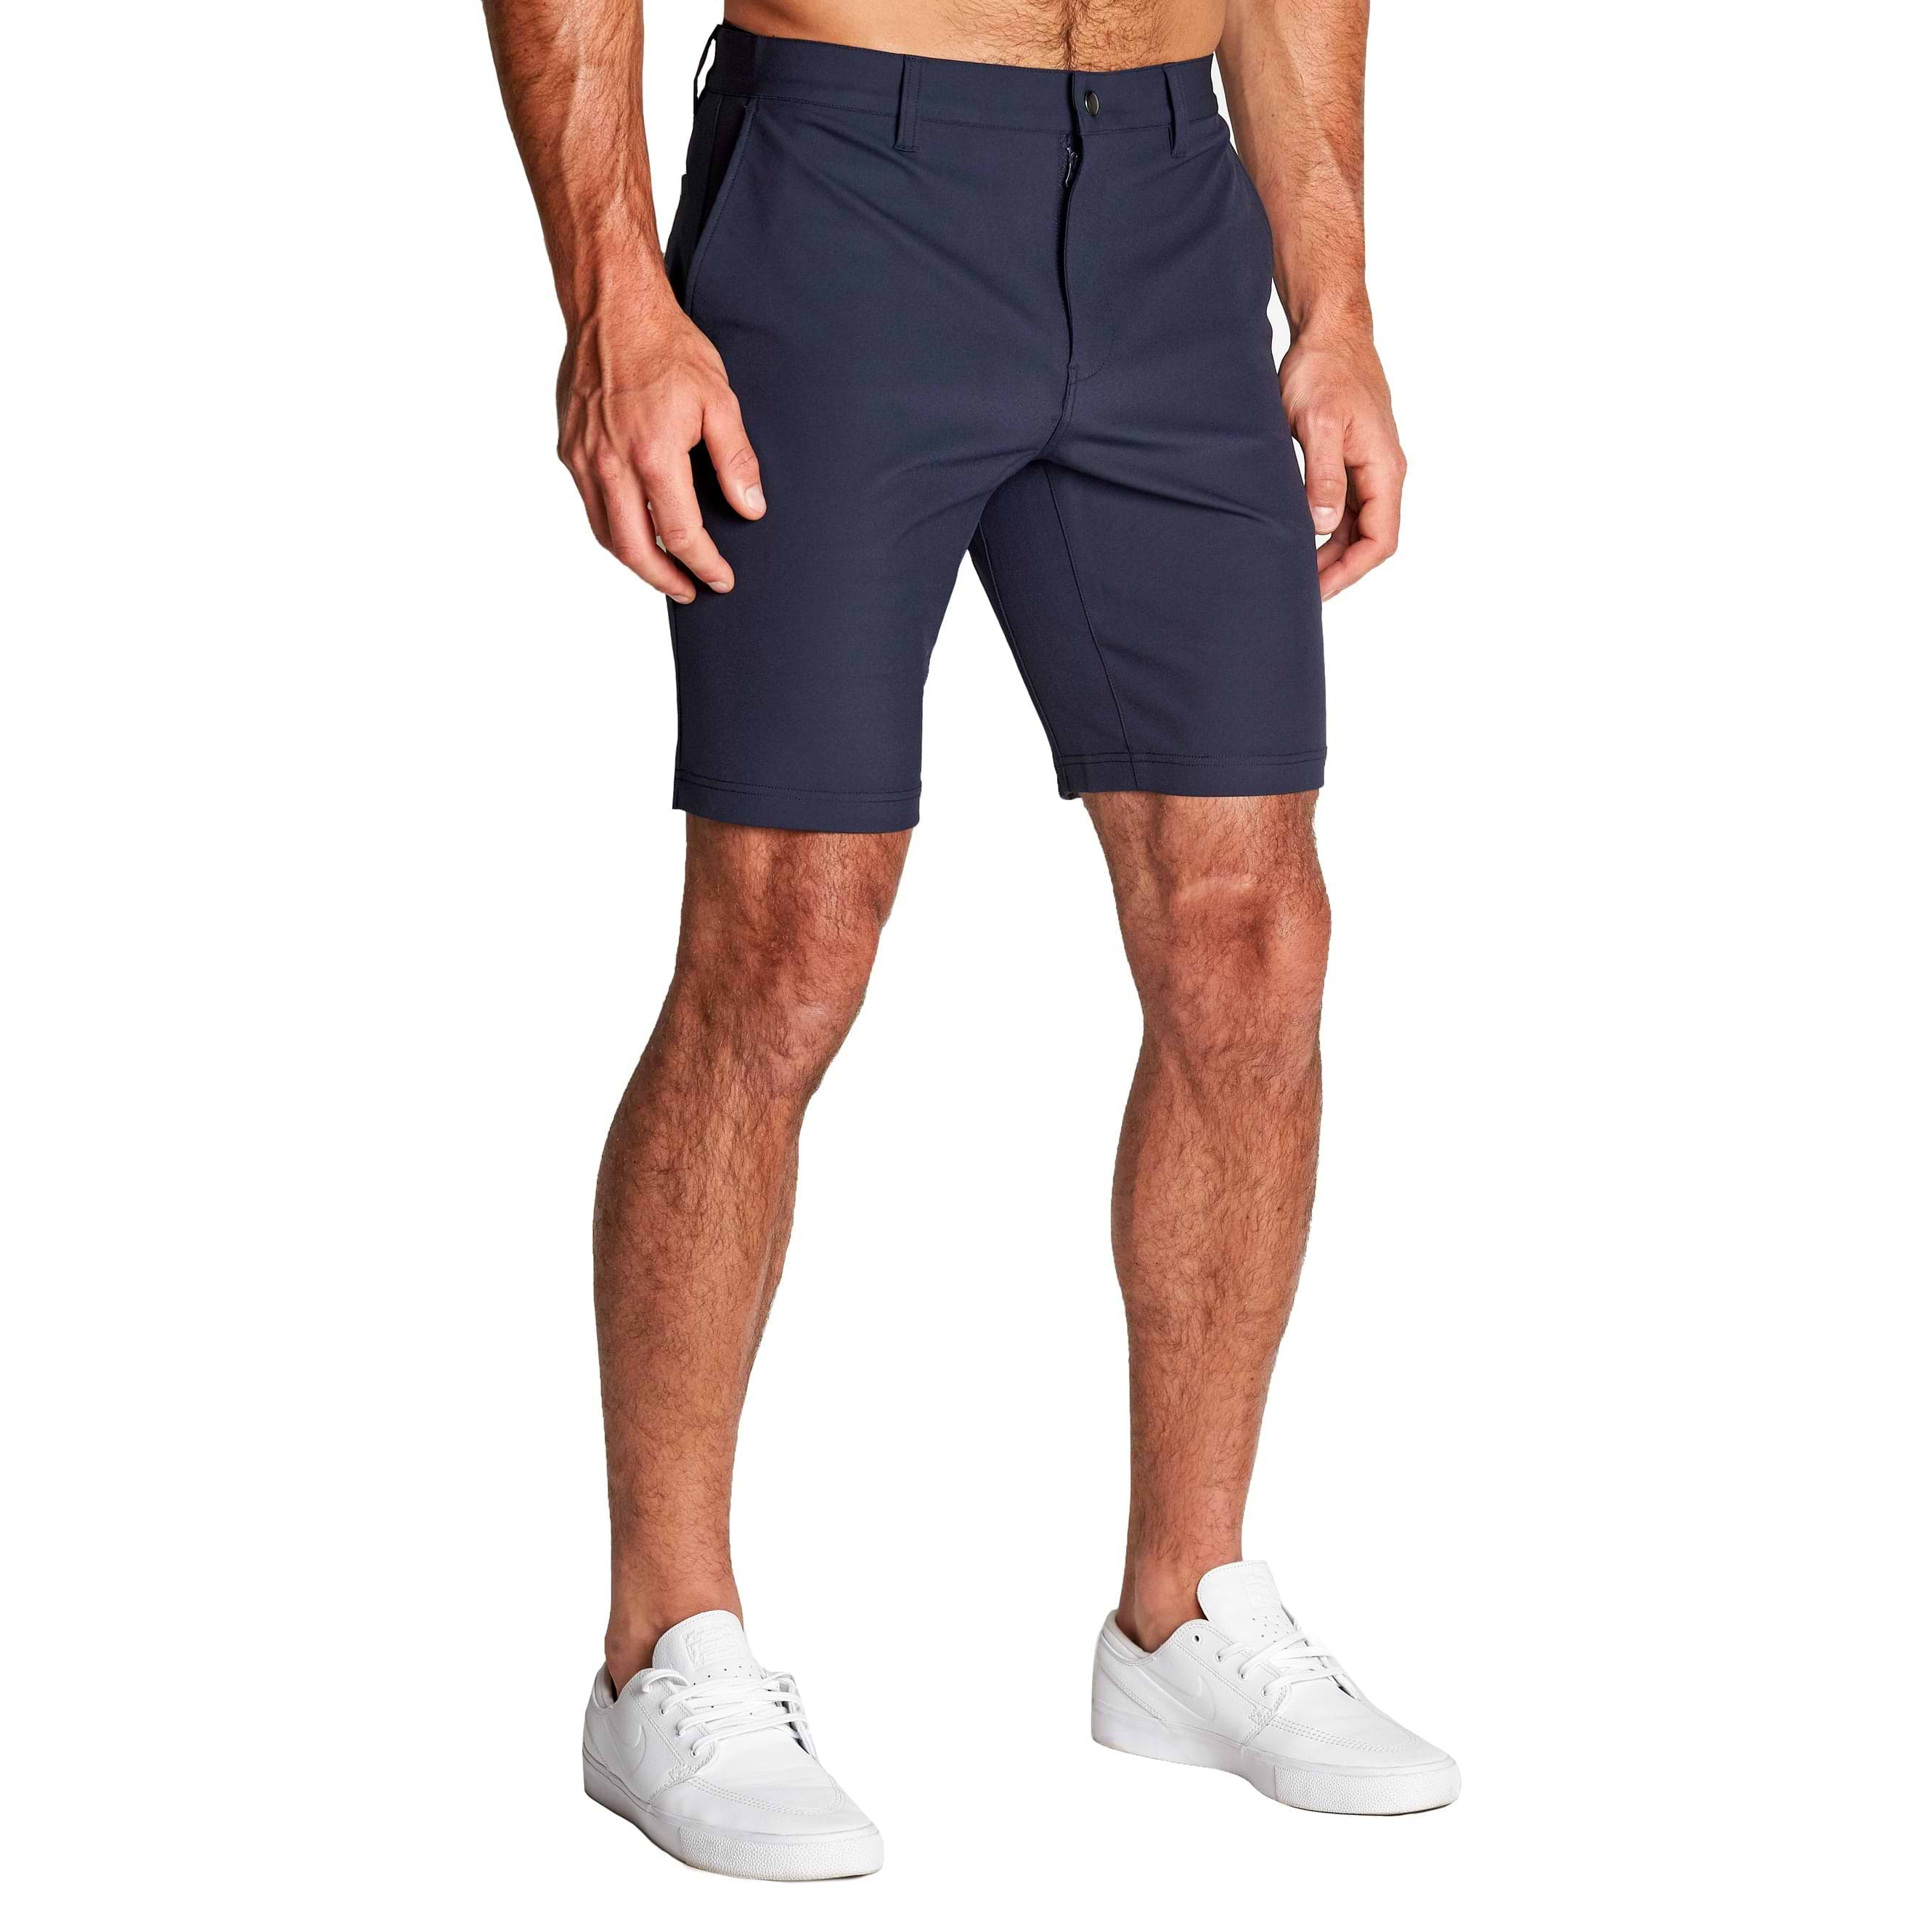 Mens Workout Shorts Slim Fitted Mens Workout Clothes Comfort Beach